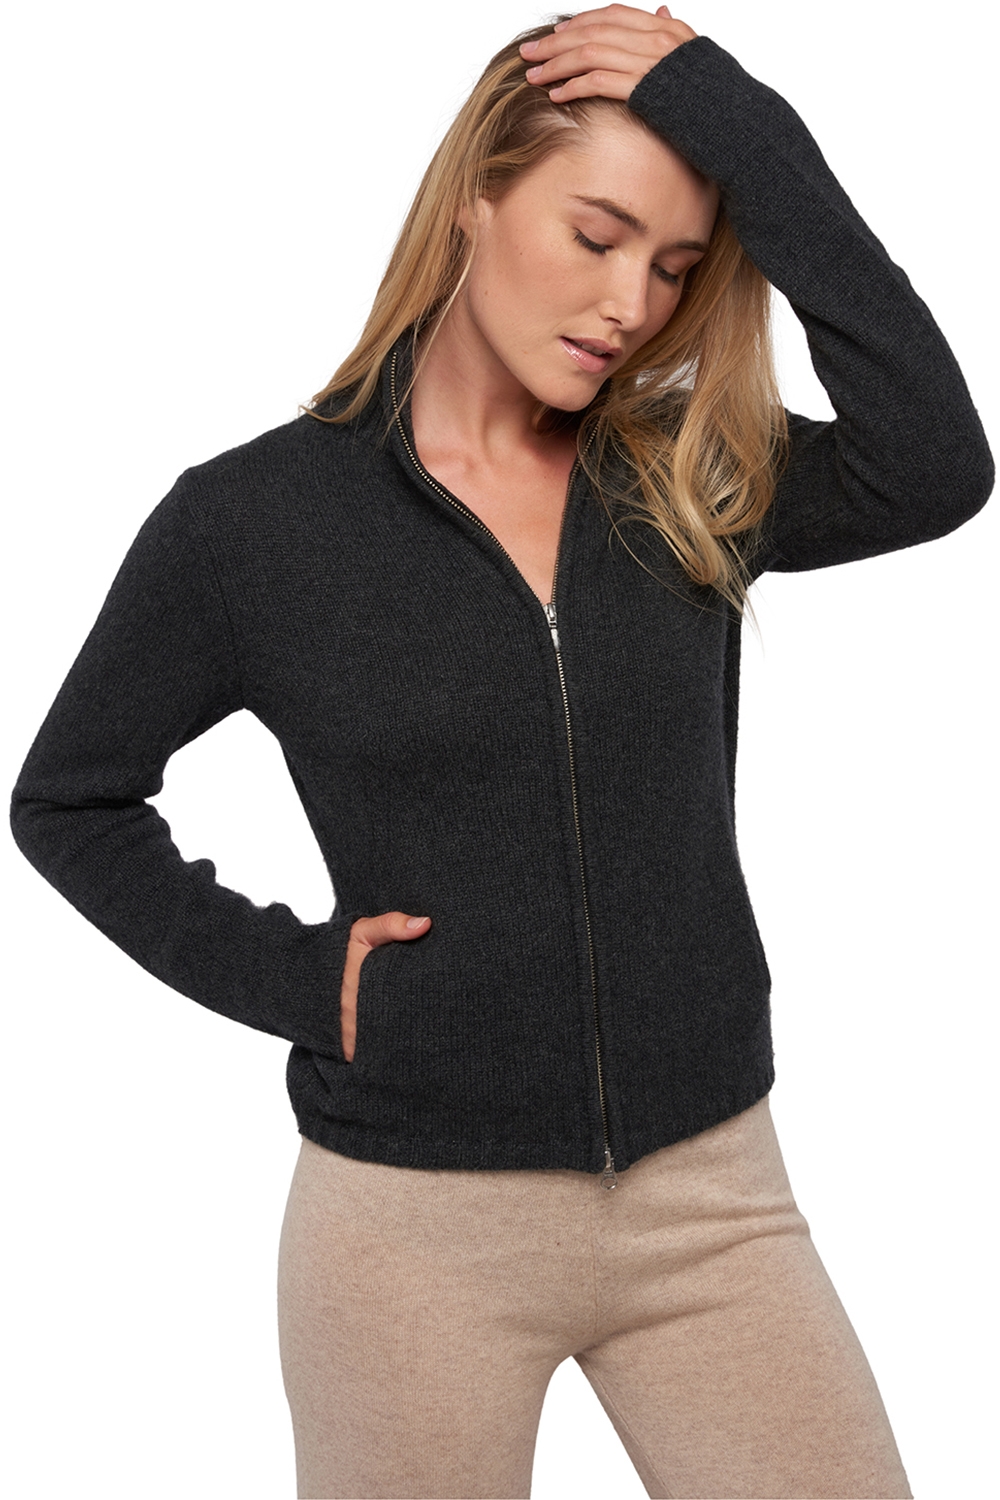 Cashmere ladies timeless classics elodie charcoal marl l